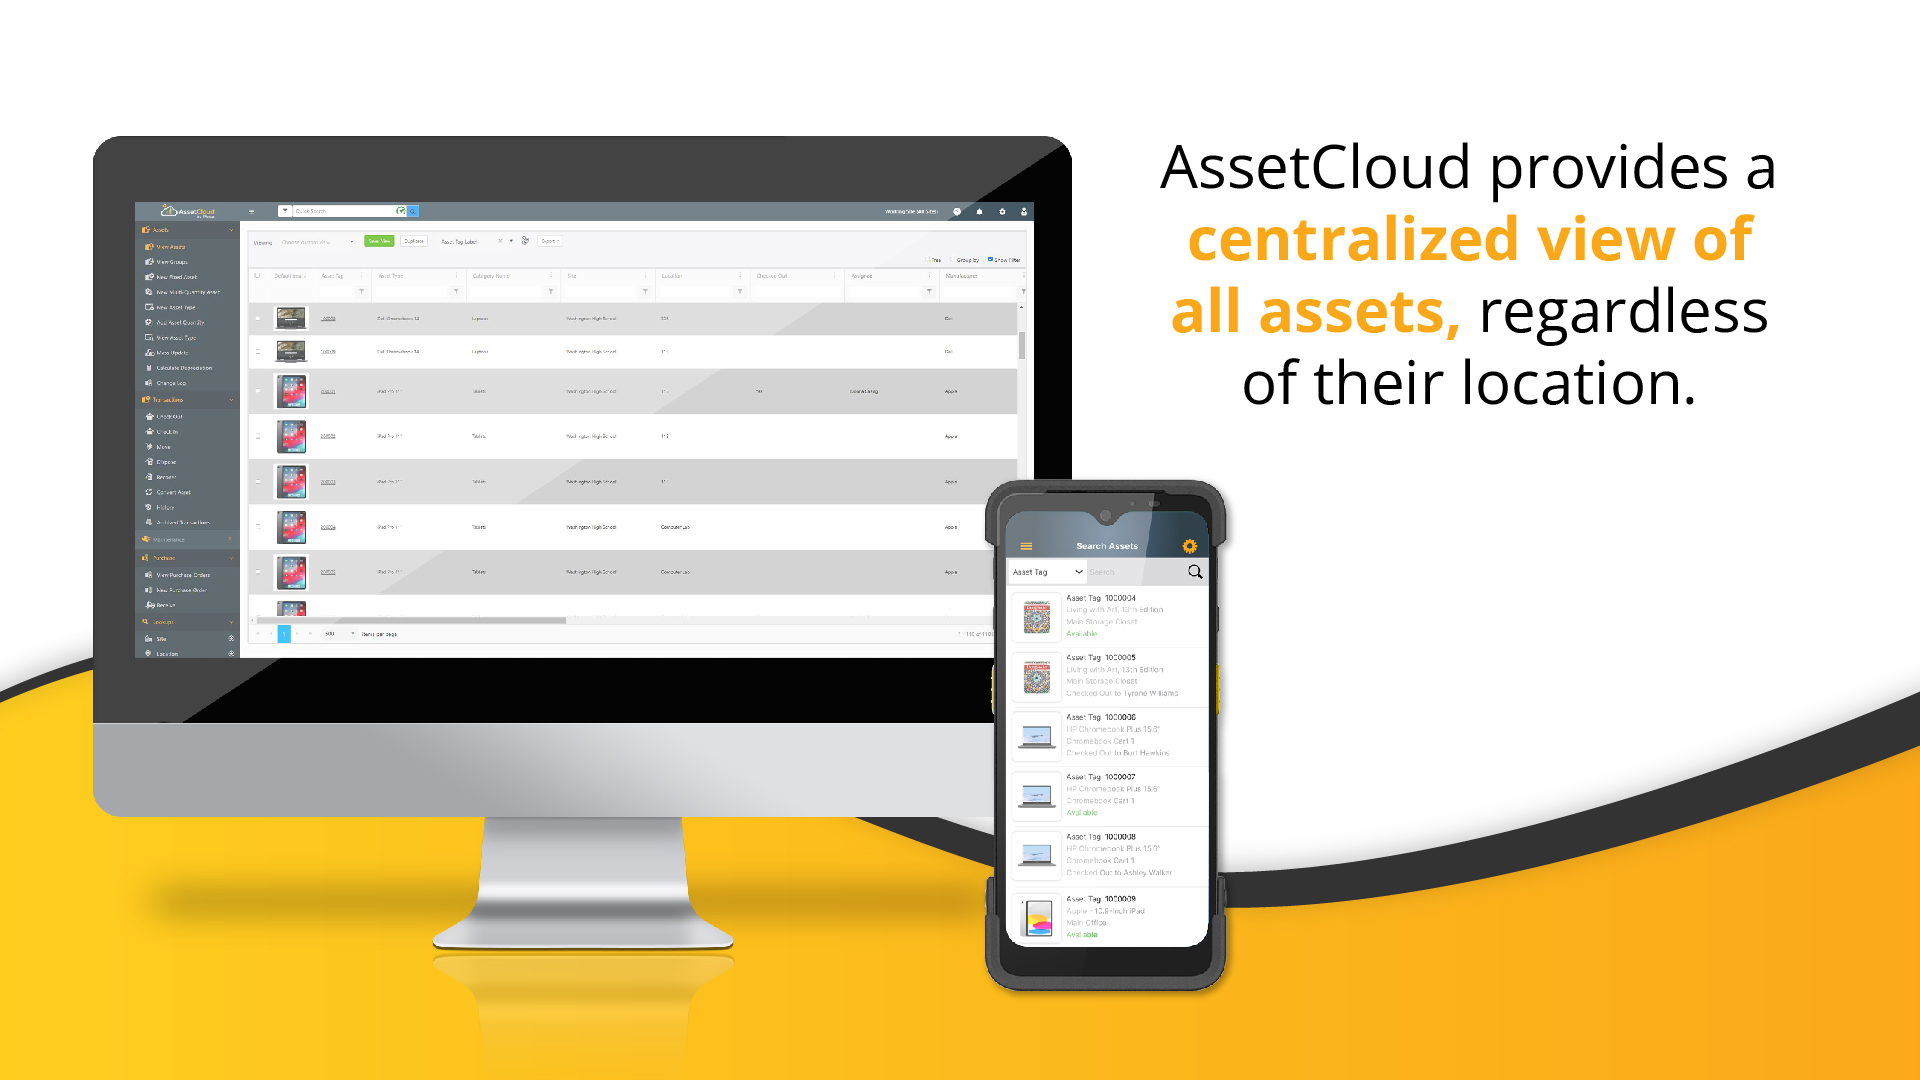 AssetCloud provides a centralized view of all assets regardless of their location